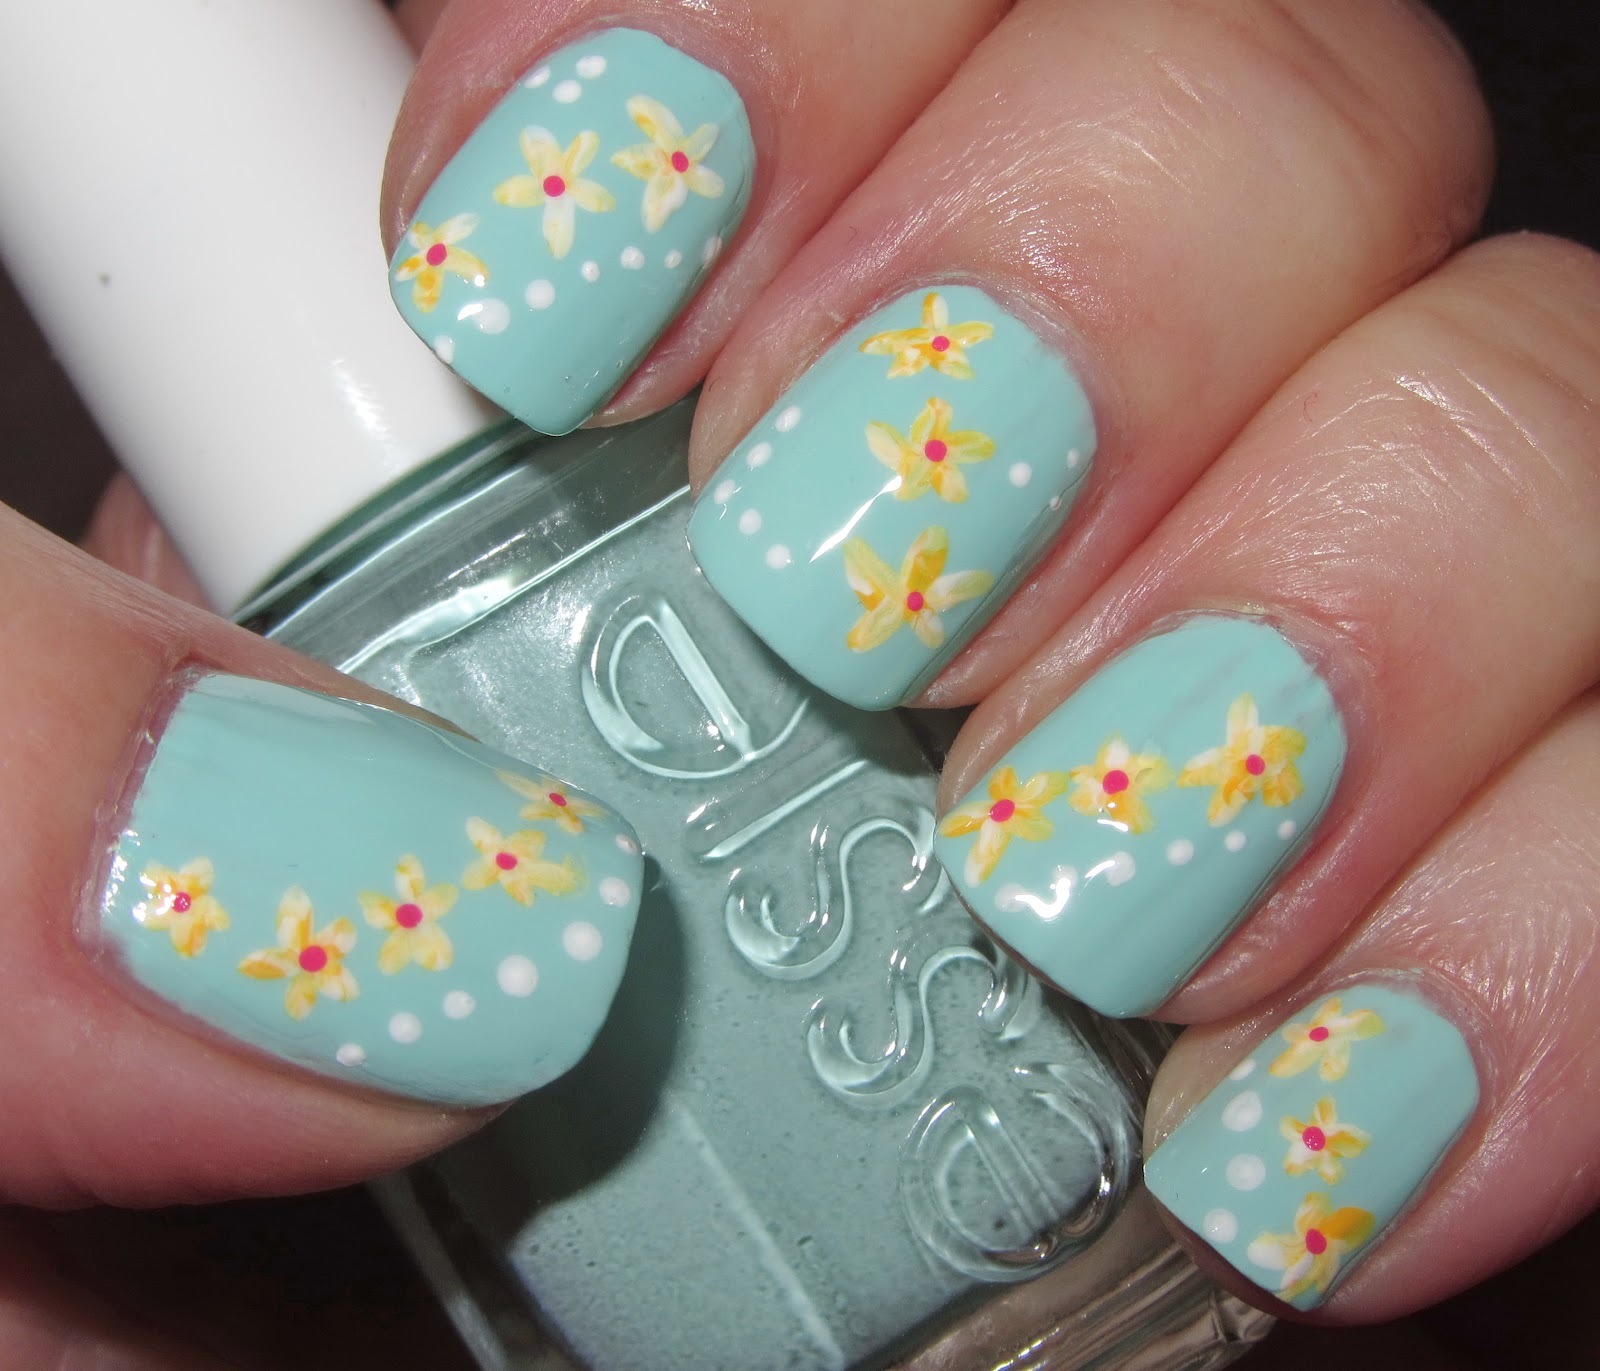 Marias Nail Art and Polish Blog: Mint pastel flowers - Pastel mint blomster